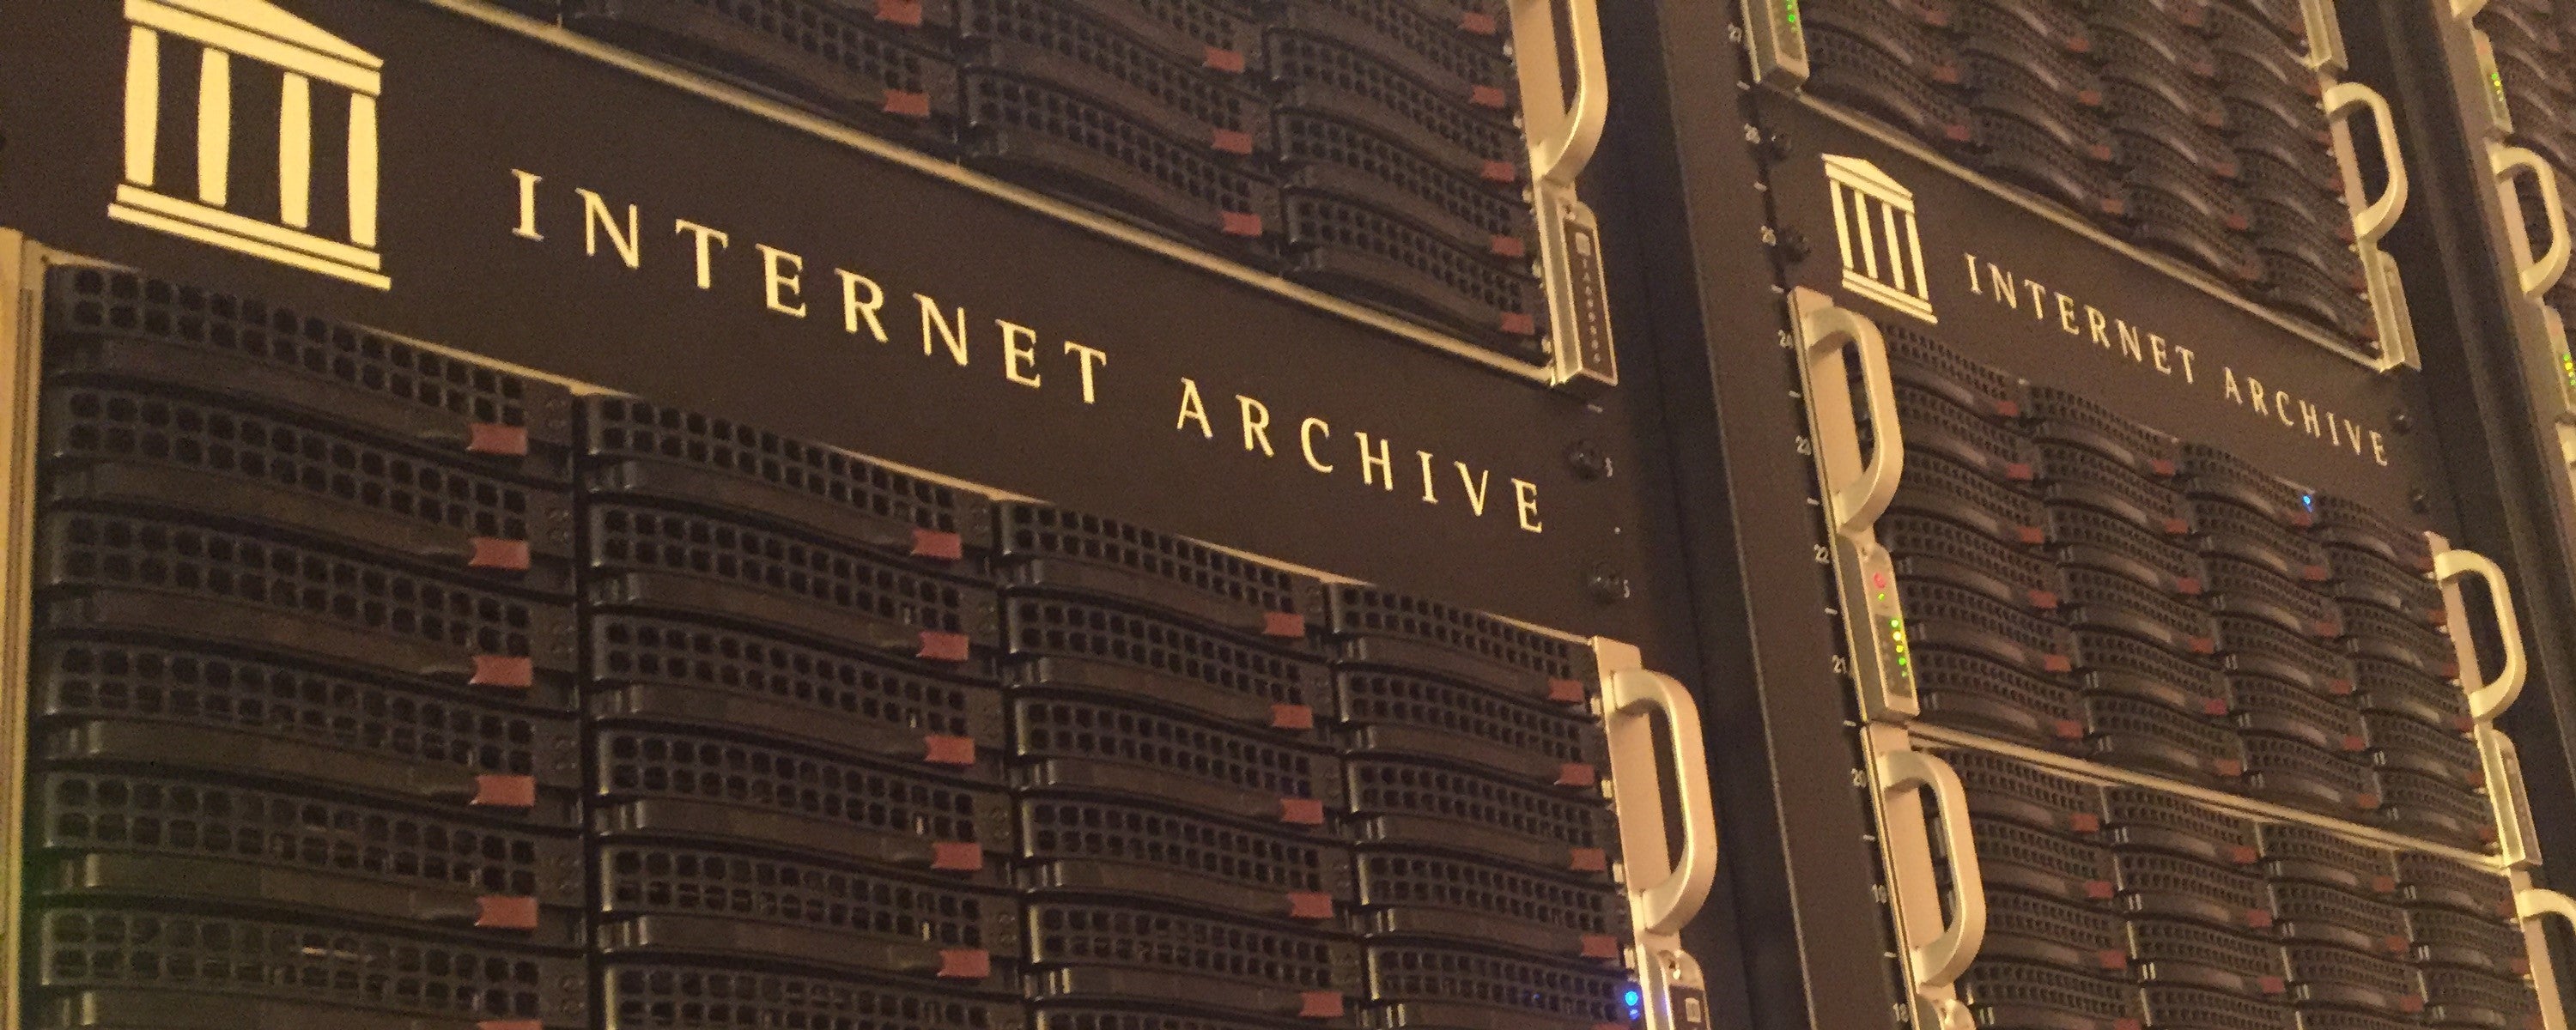 Stack of Internet Servers with title/logo of "Internet Archives"